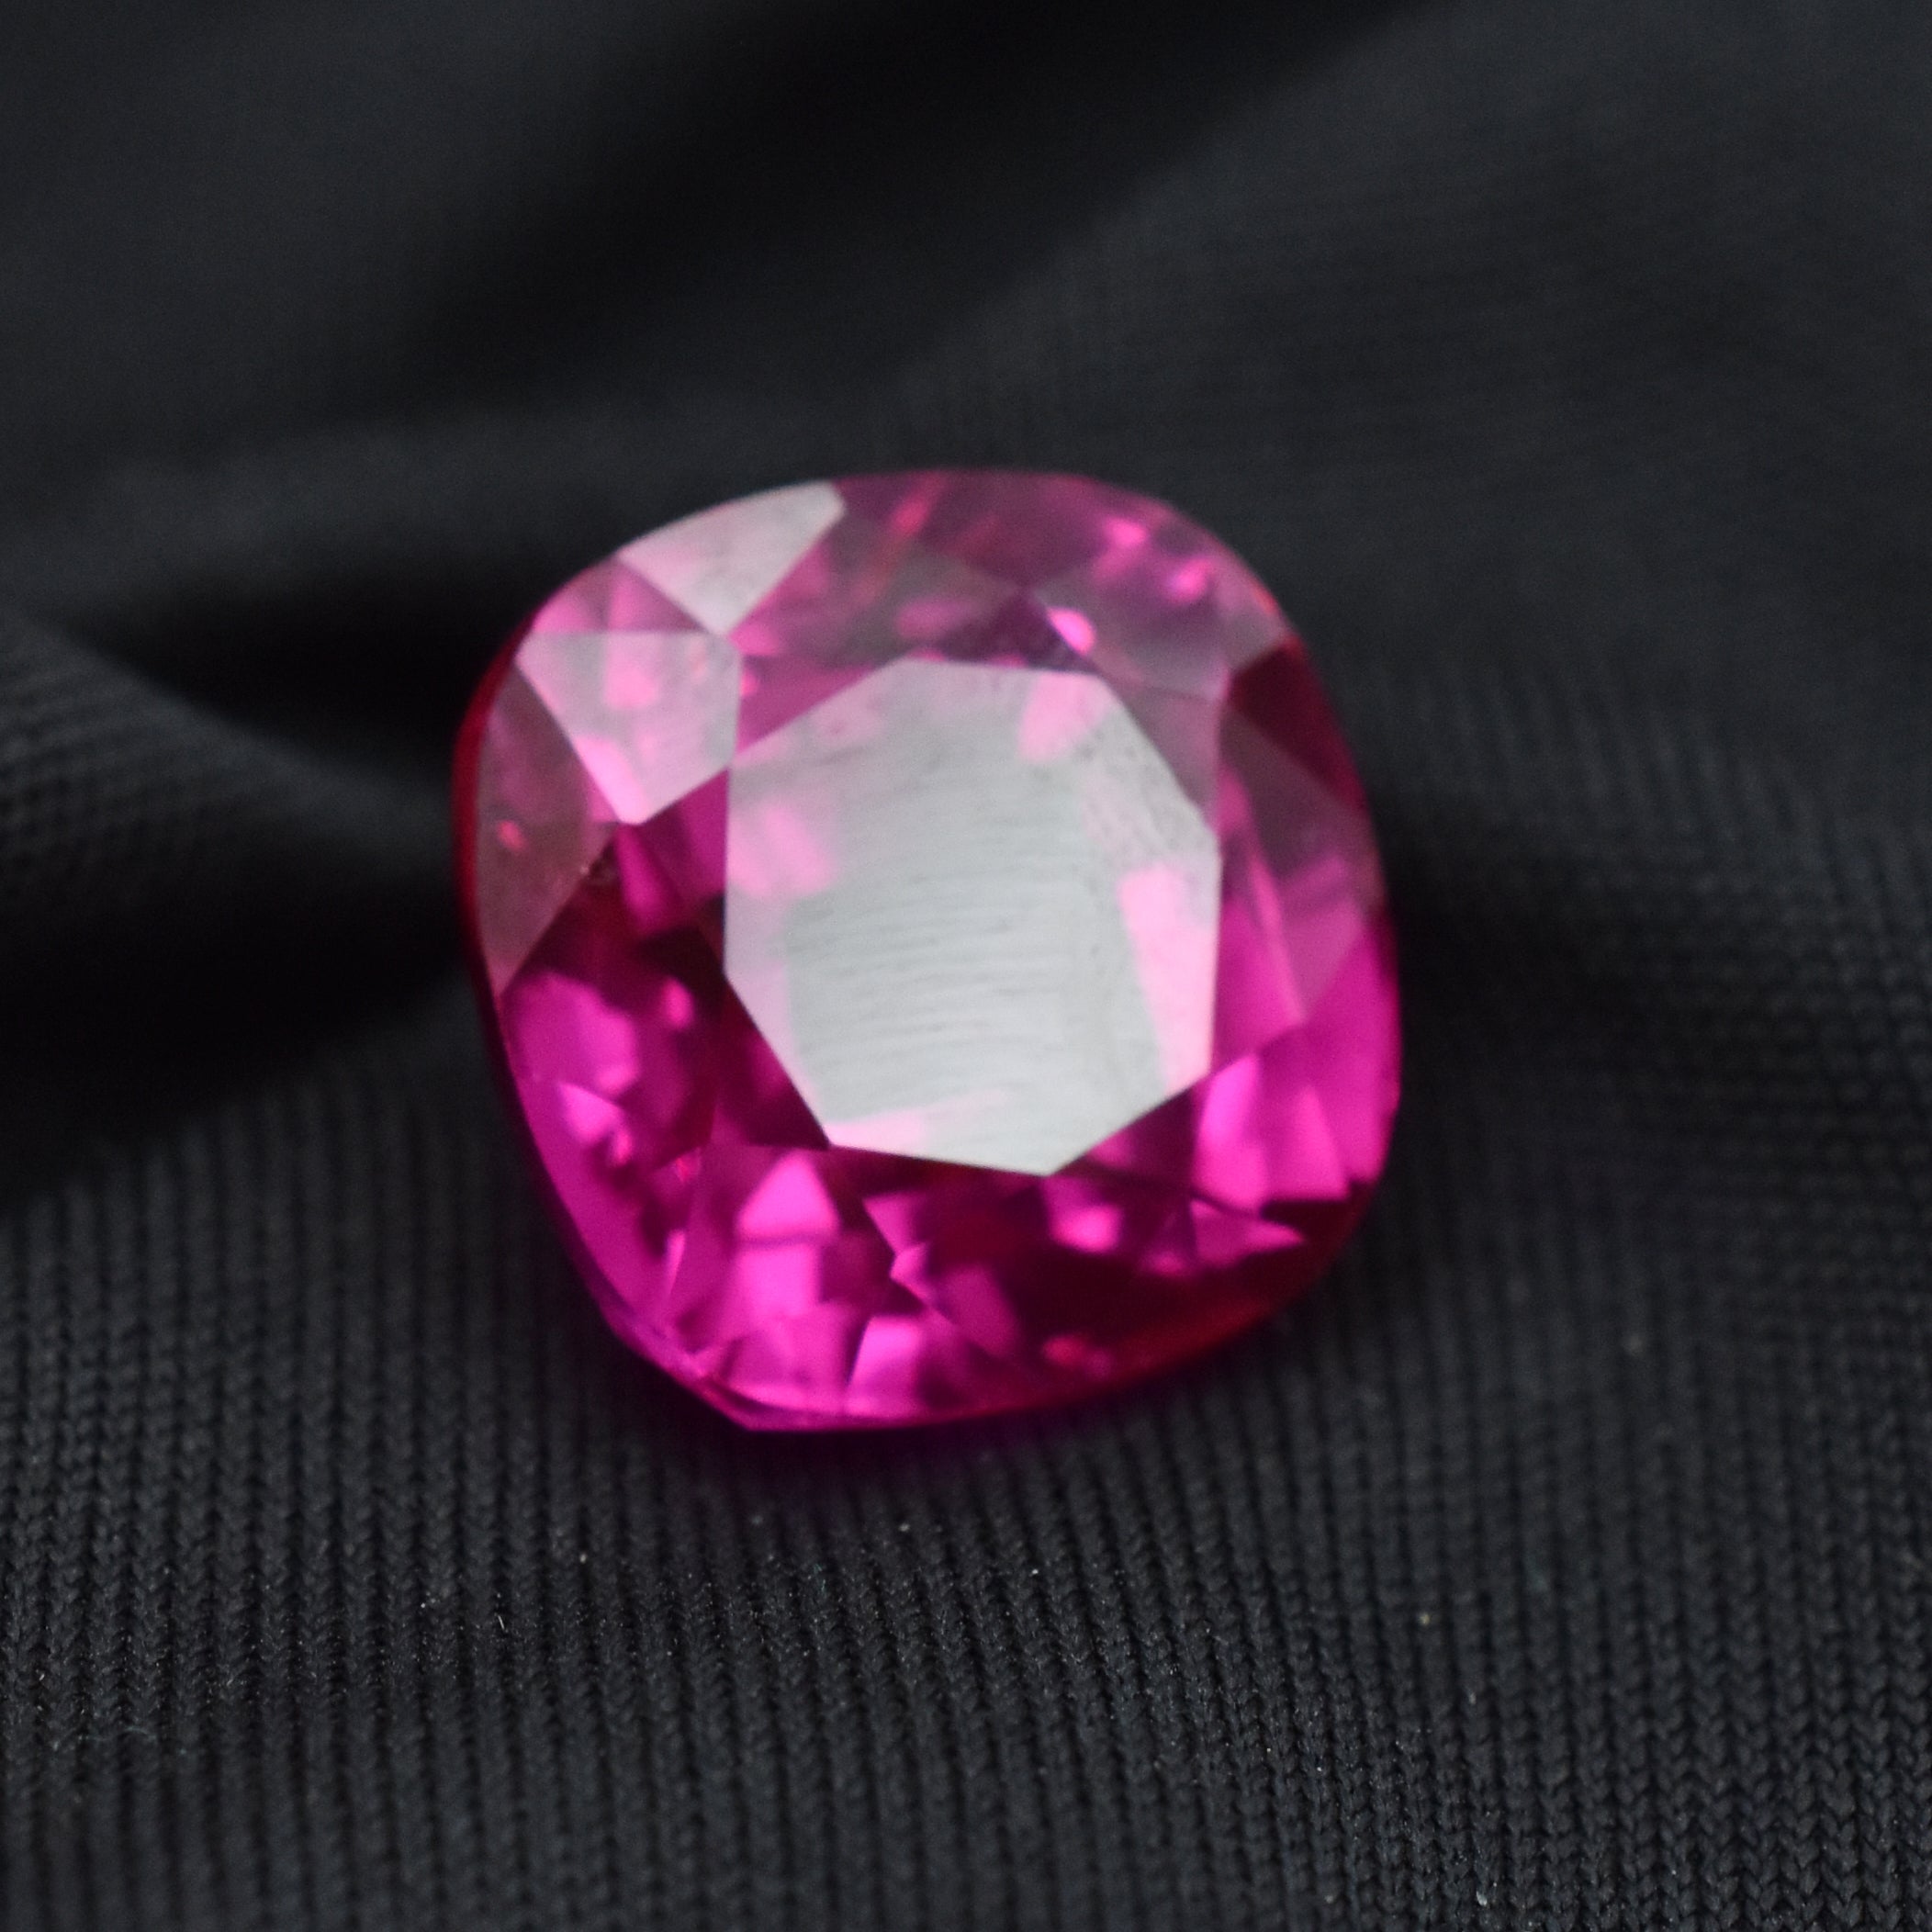 Ruby Stone Square Cushion Cut Ruby 13X13 mm Oval Ruby Stone Natural Ruby Pink Ruby Beautiful Large Ruby Jewelry Making stone